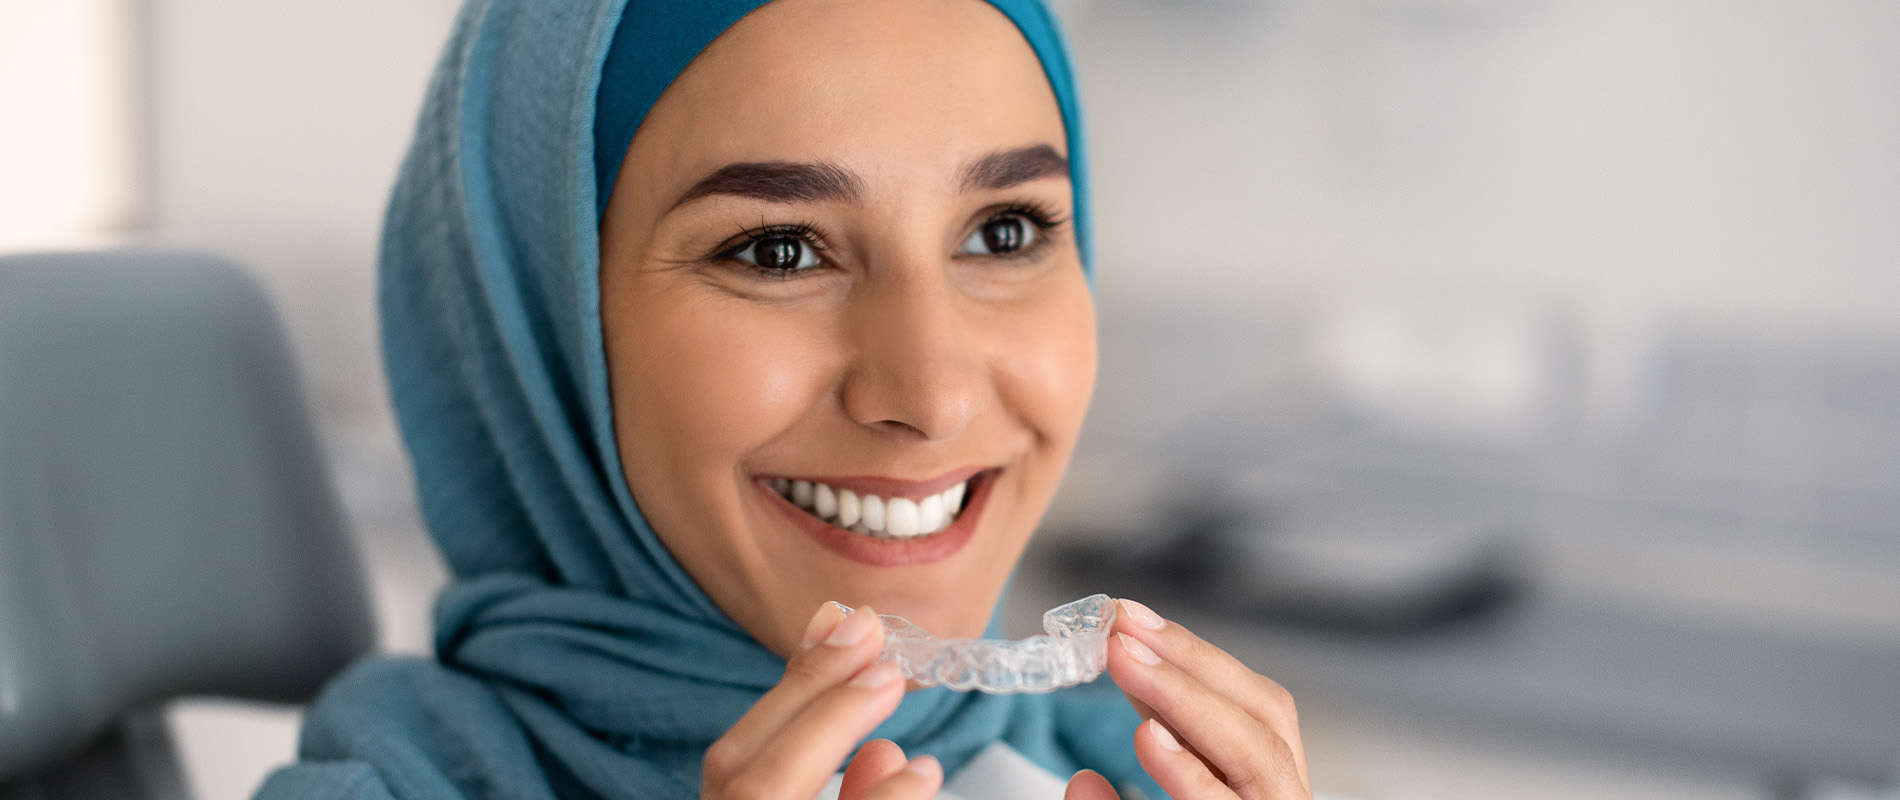 Protecting my investment. : r/Invisalign